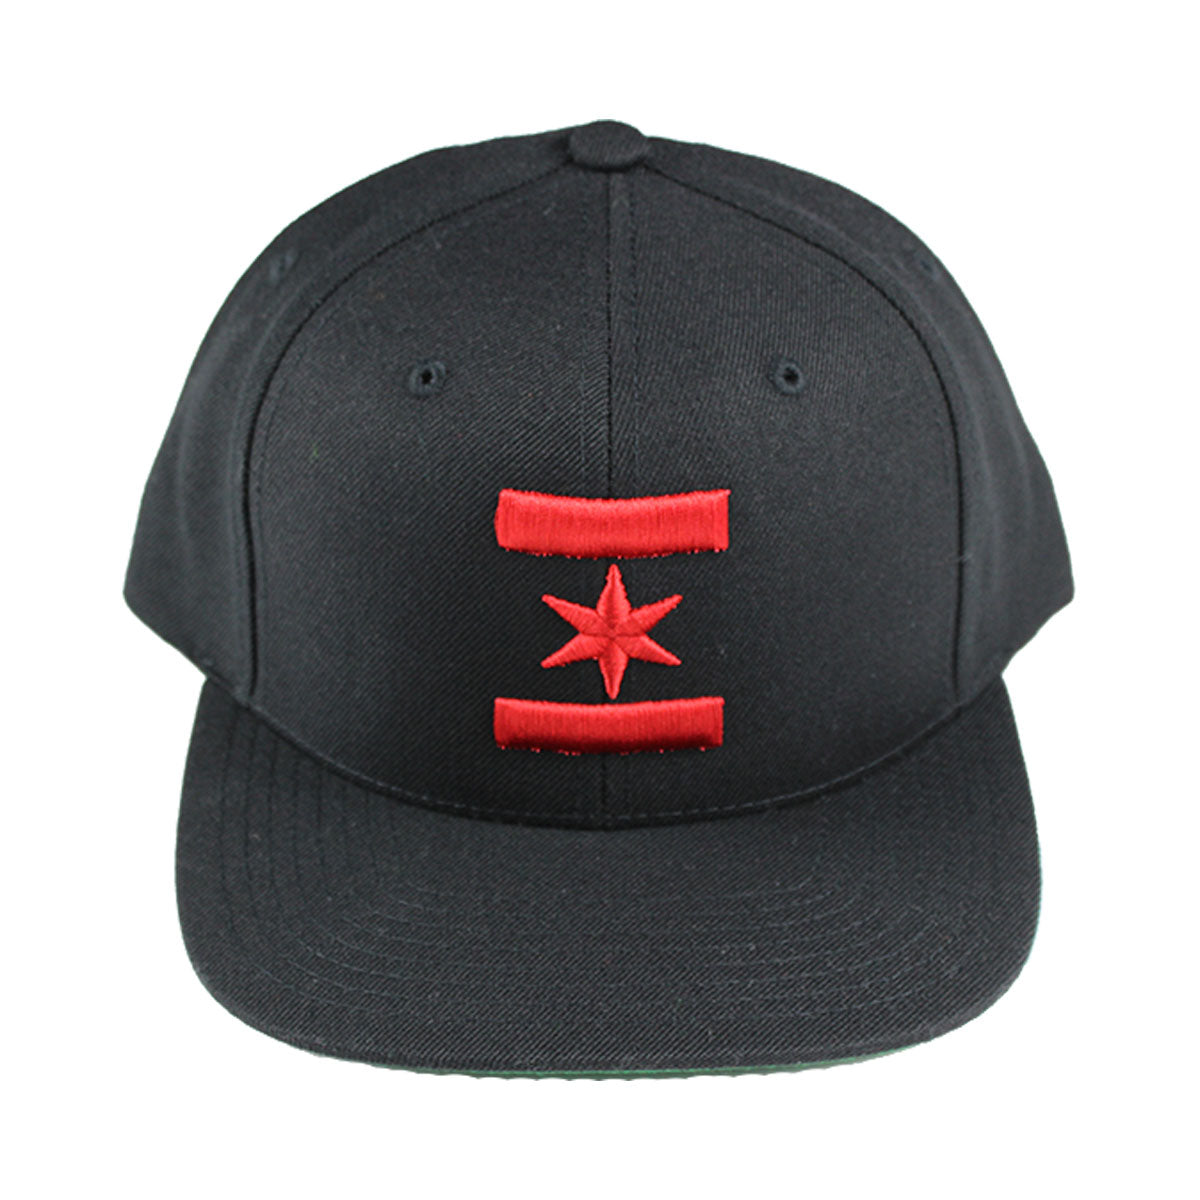 We Are One Star Snapback (Black w/ Red)